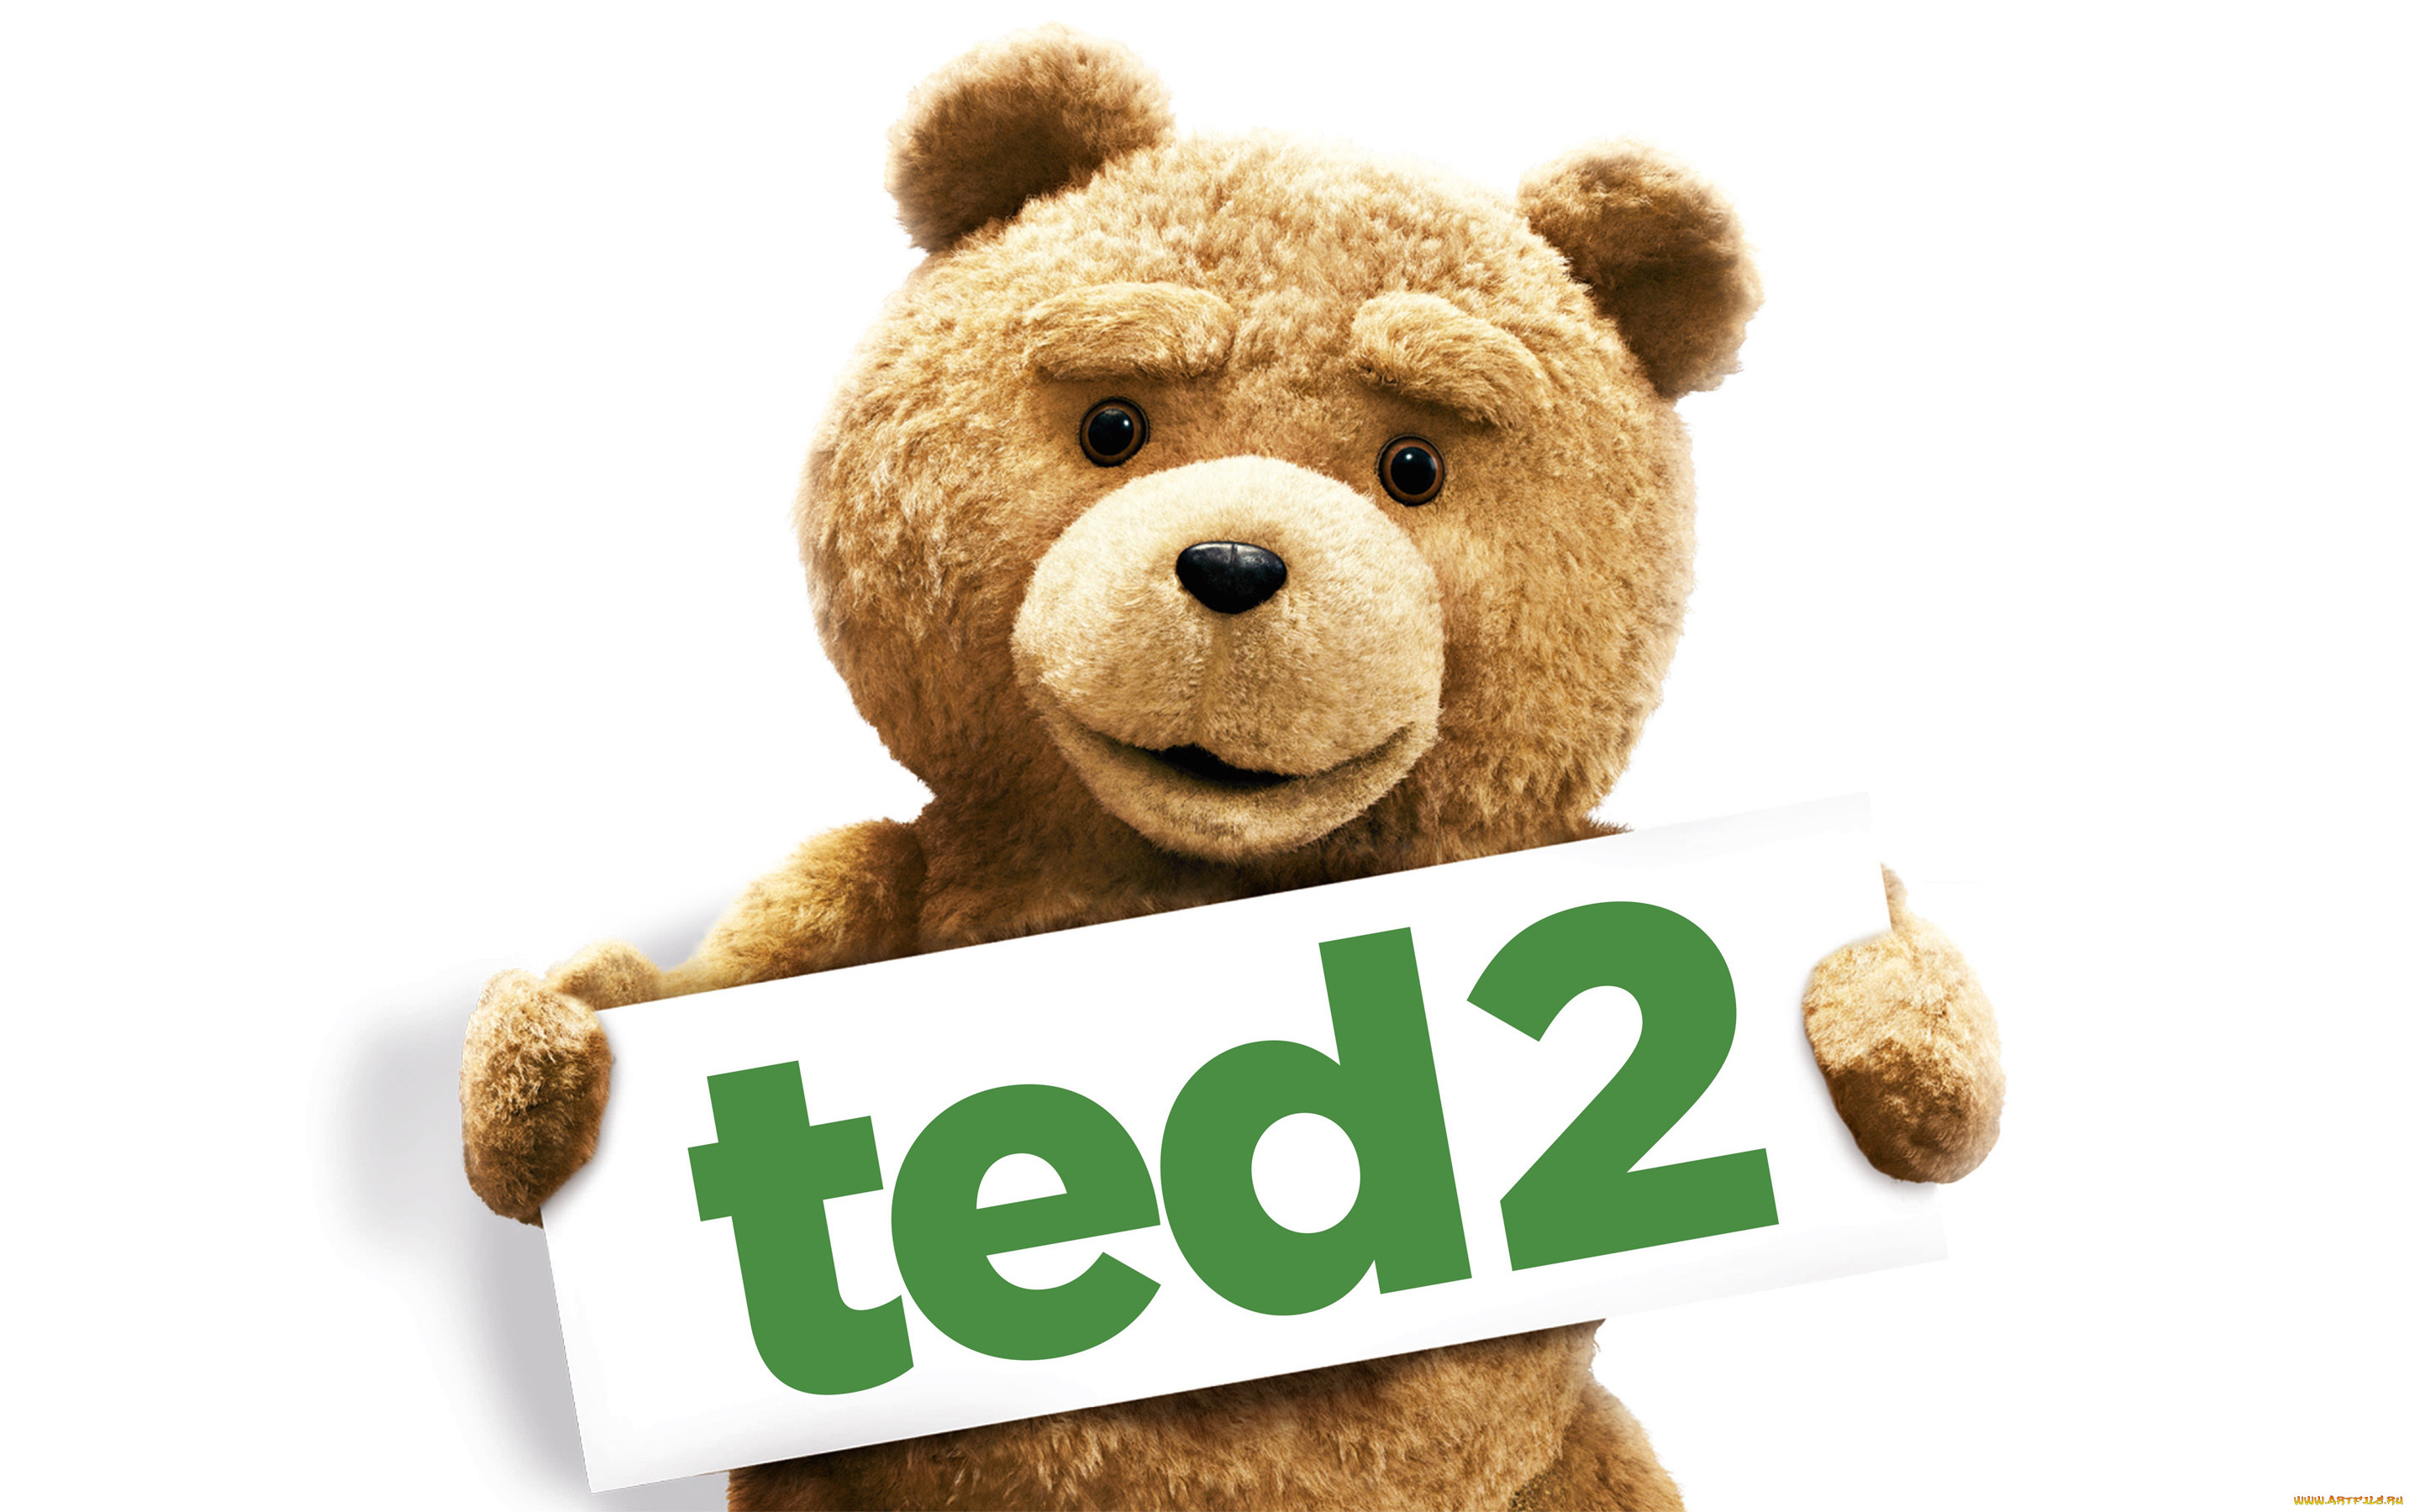  , ted 2, ted, 2